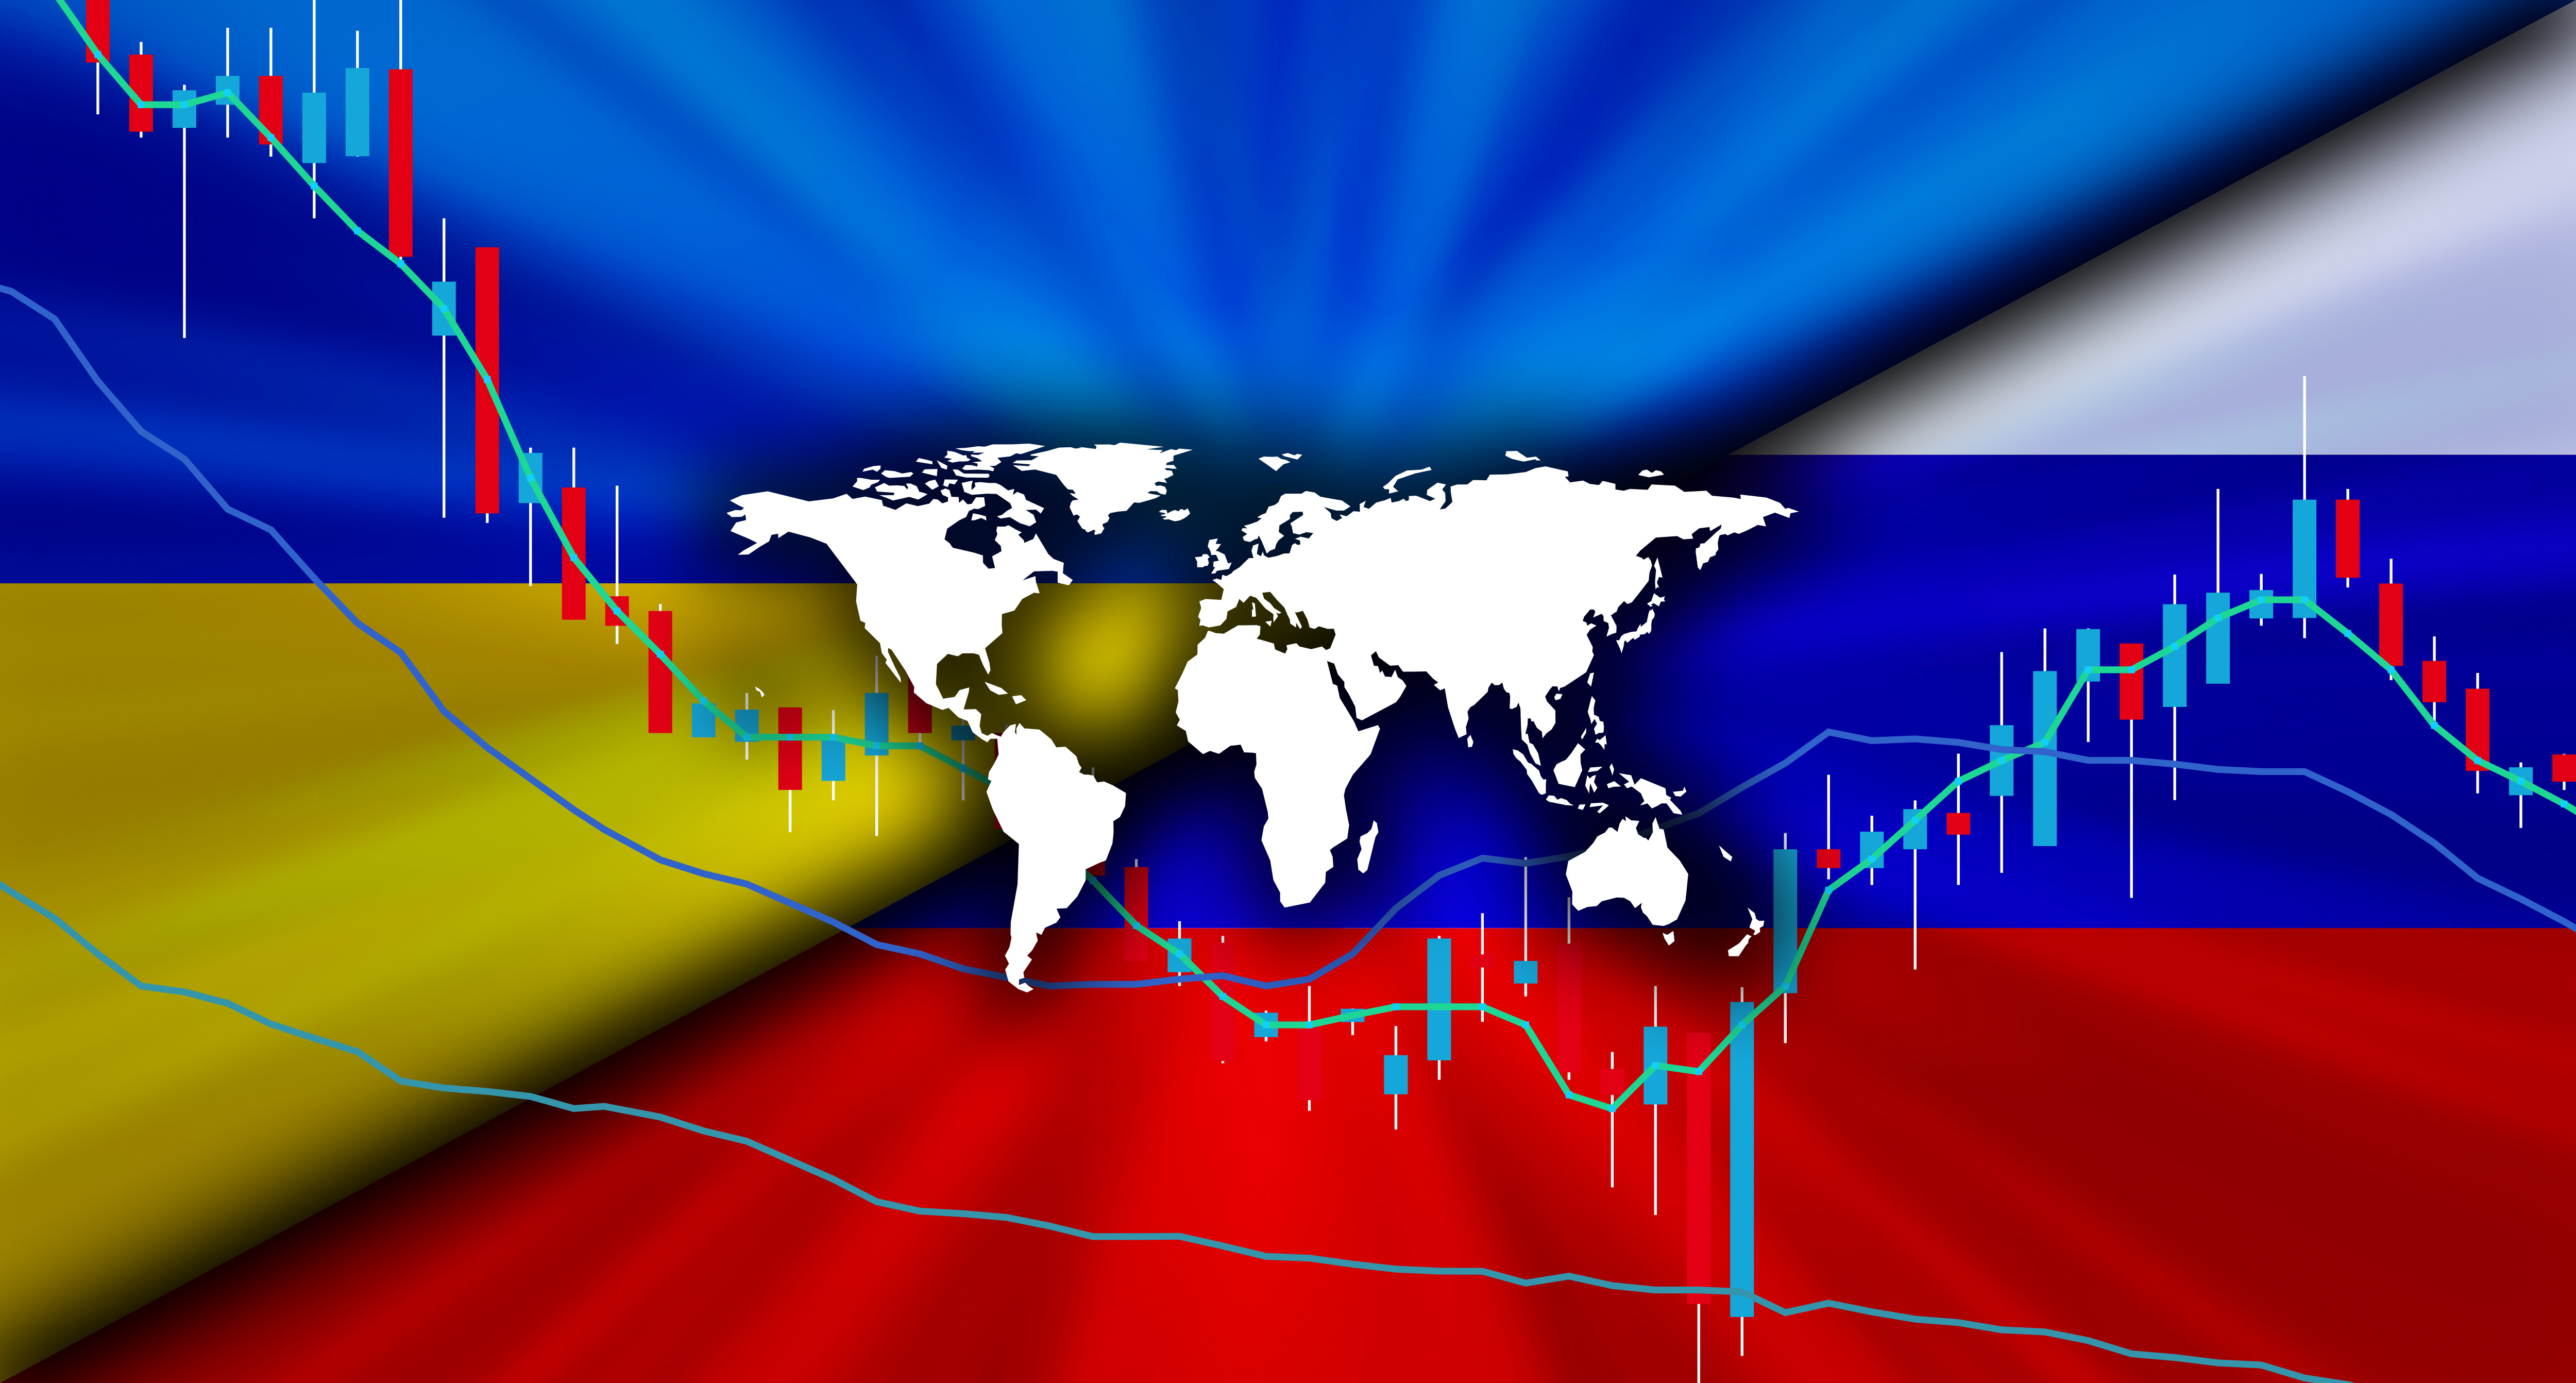 Ukraine/russia flags over financial graph